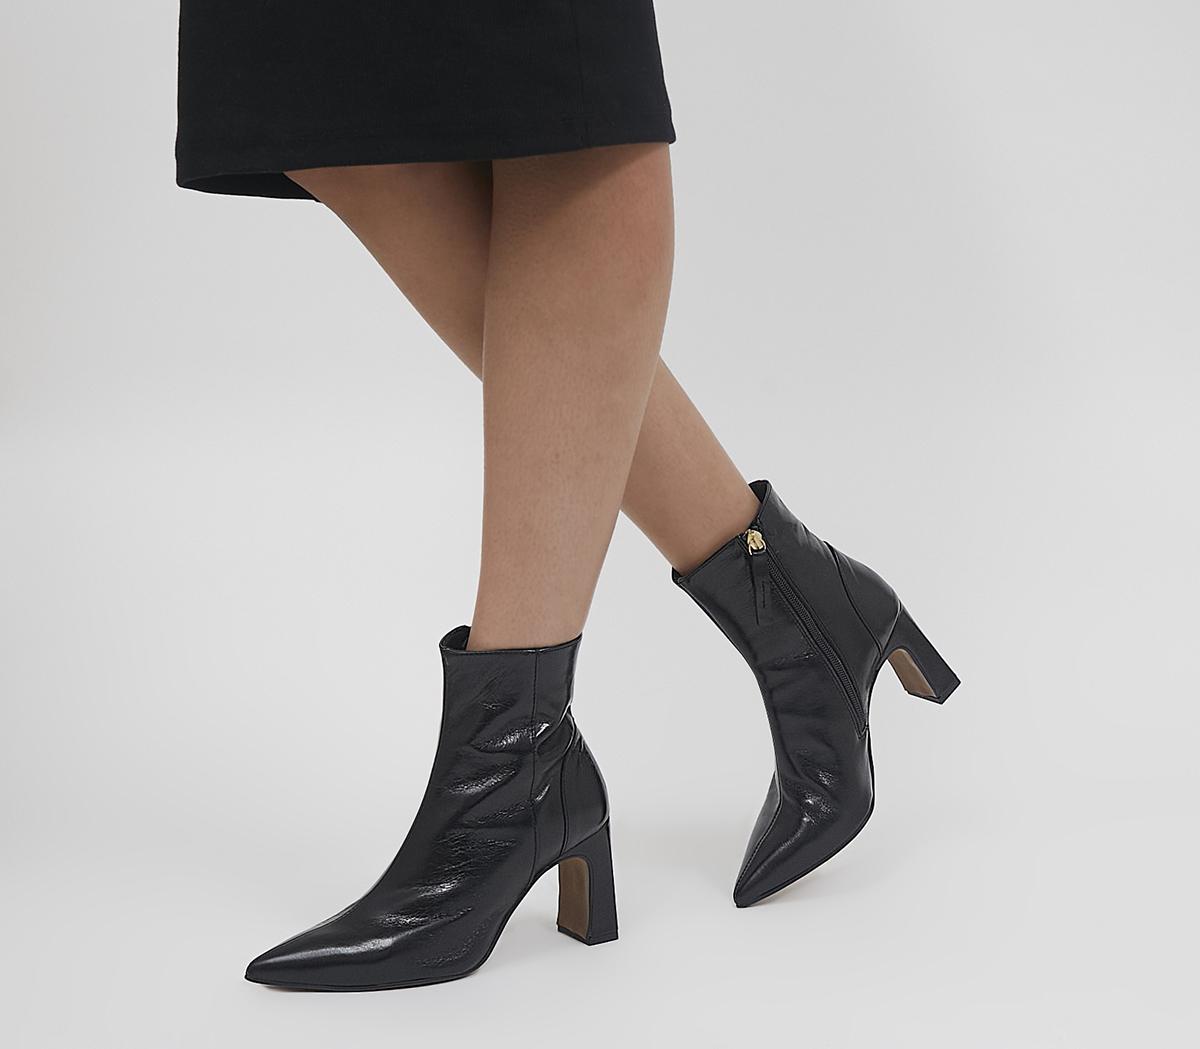 OfficeAster Heeled Point BootsBlack Leather